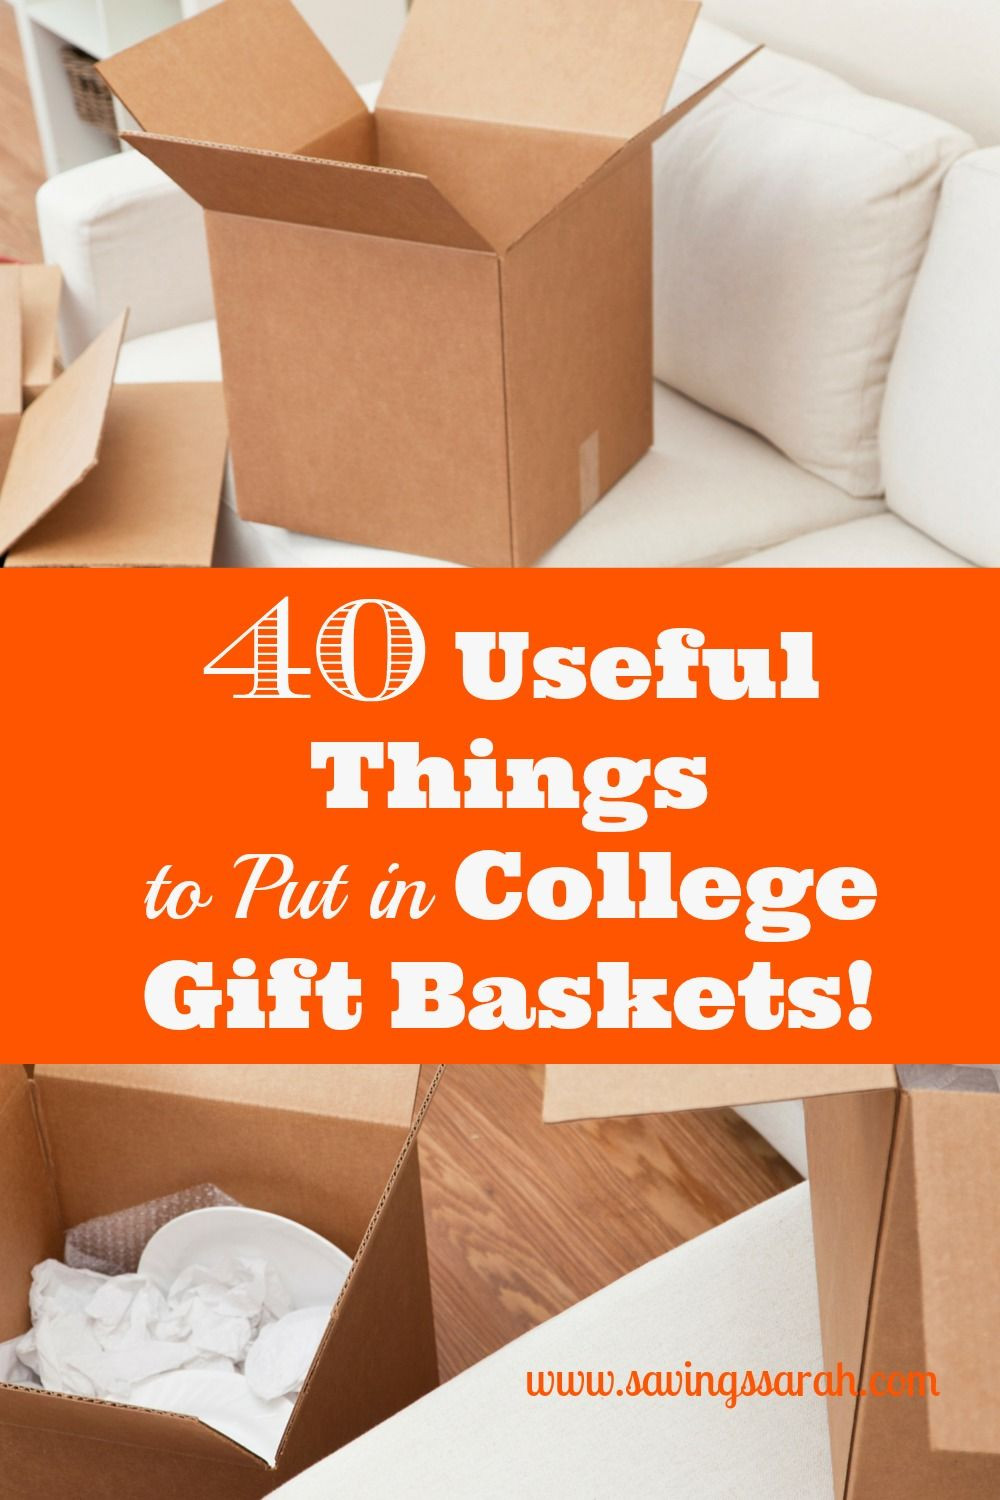 Gift Basket Ideas For College Students
 40 Useful Things to Put in College Gift Baskets